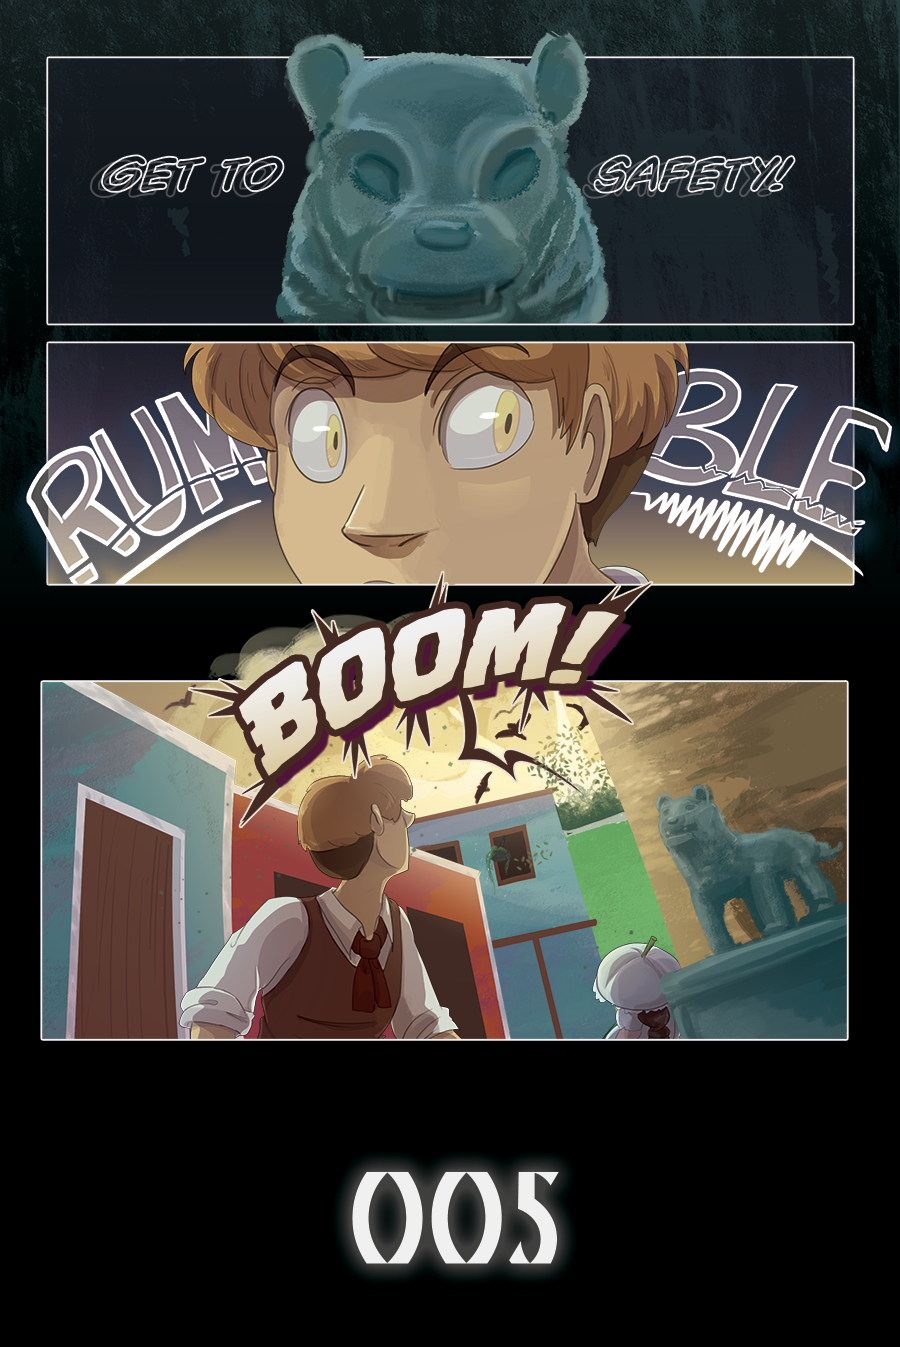 Chapter 5, prologue page 3